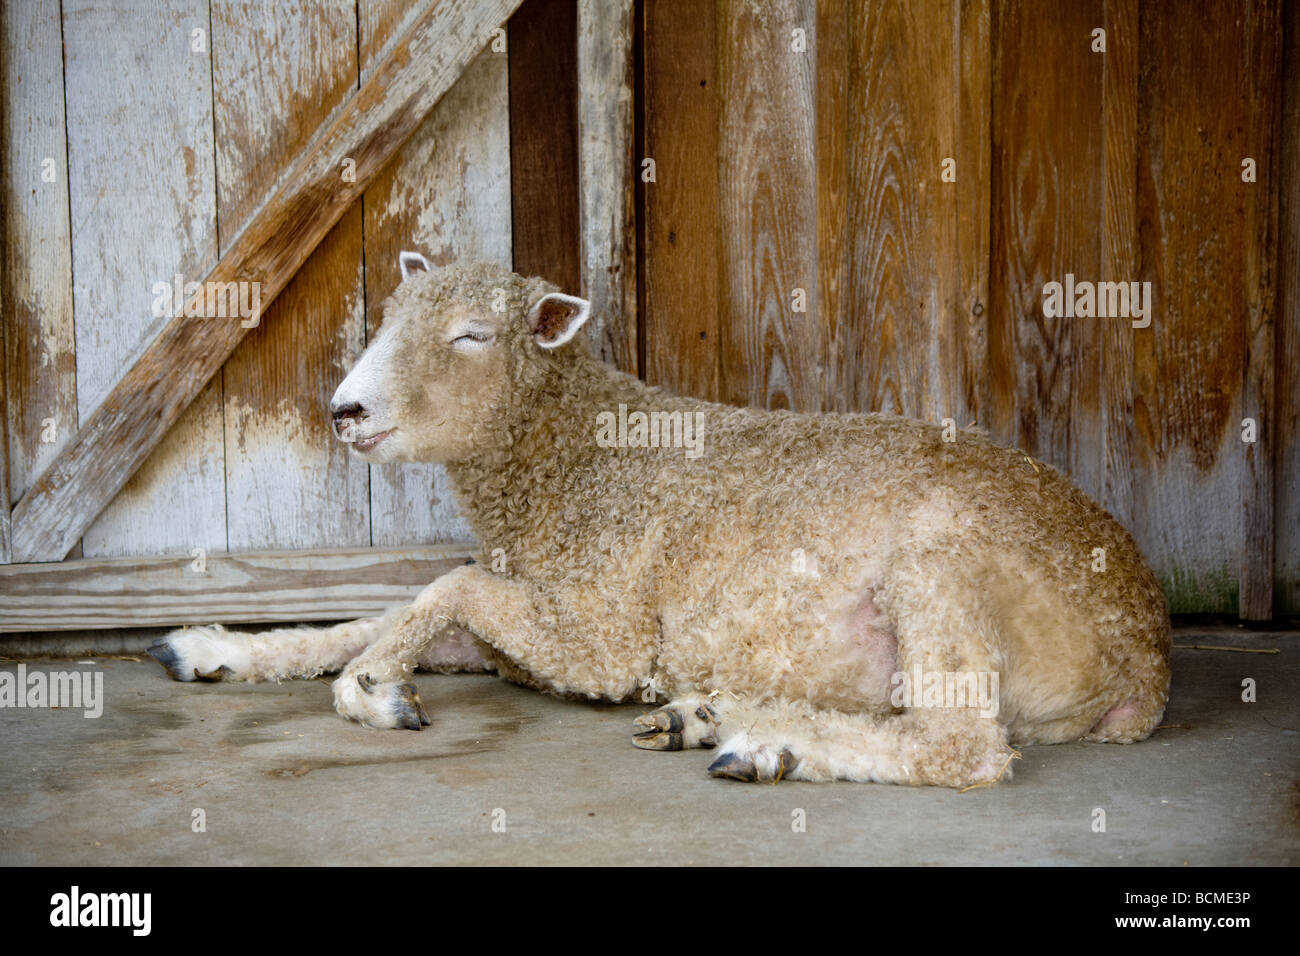 Sheep resting by the barn Stock Photo